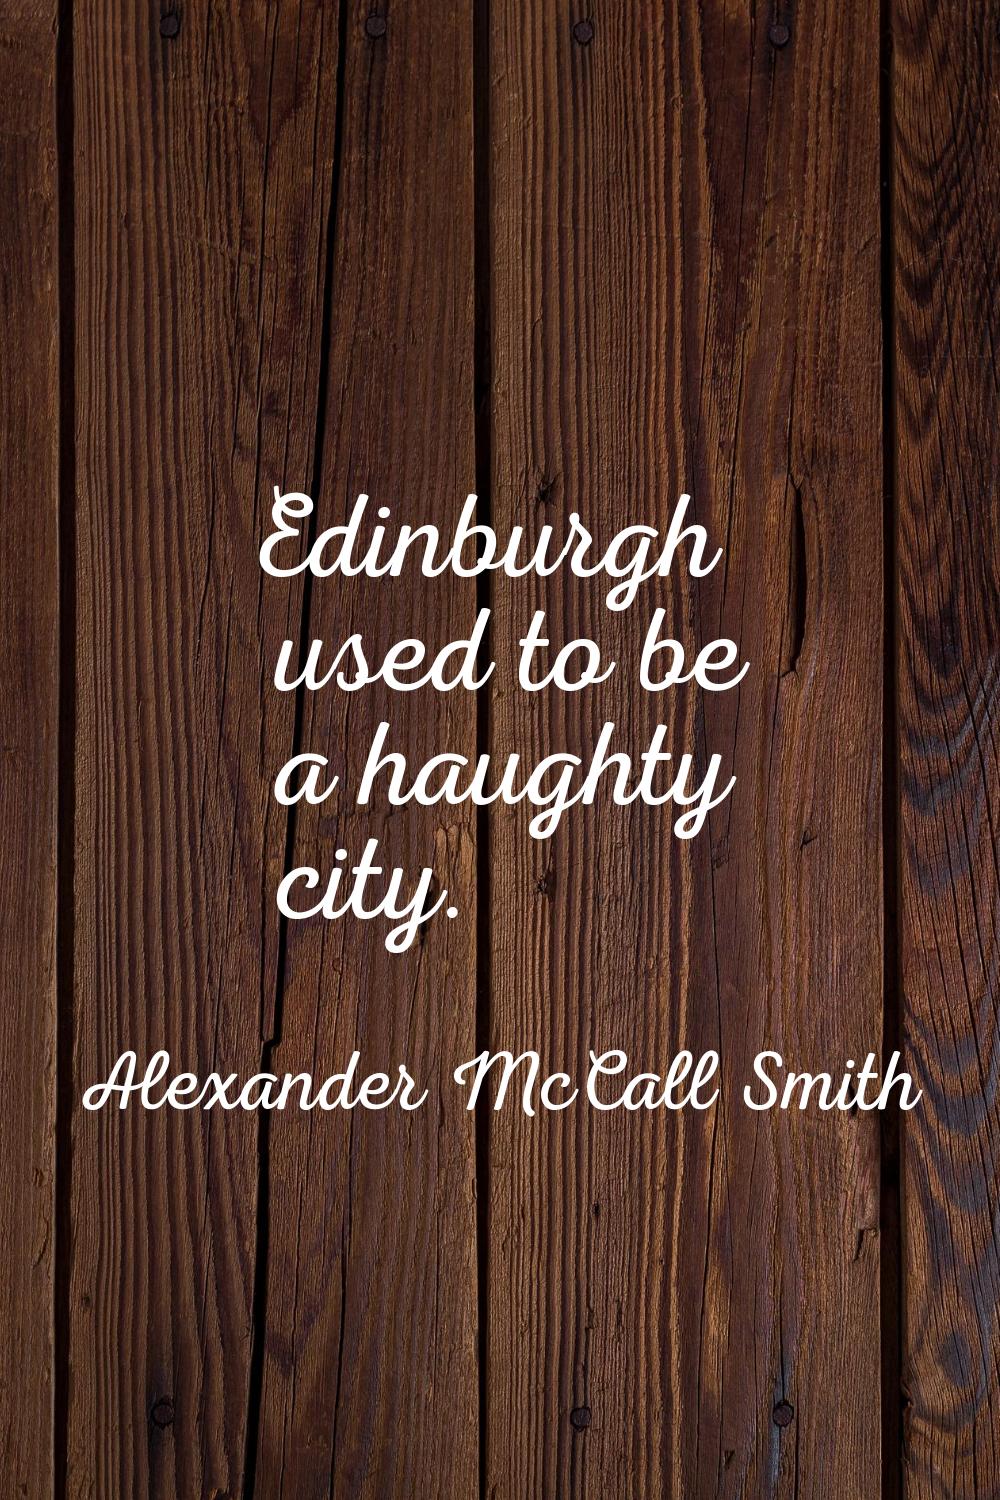 Edinburgh used to be a haughty city.